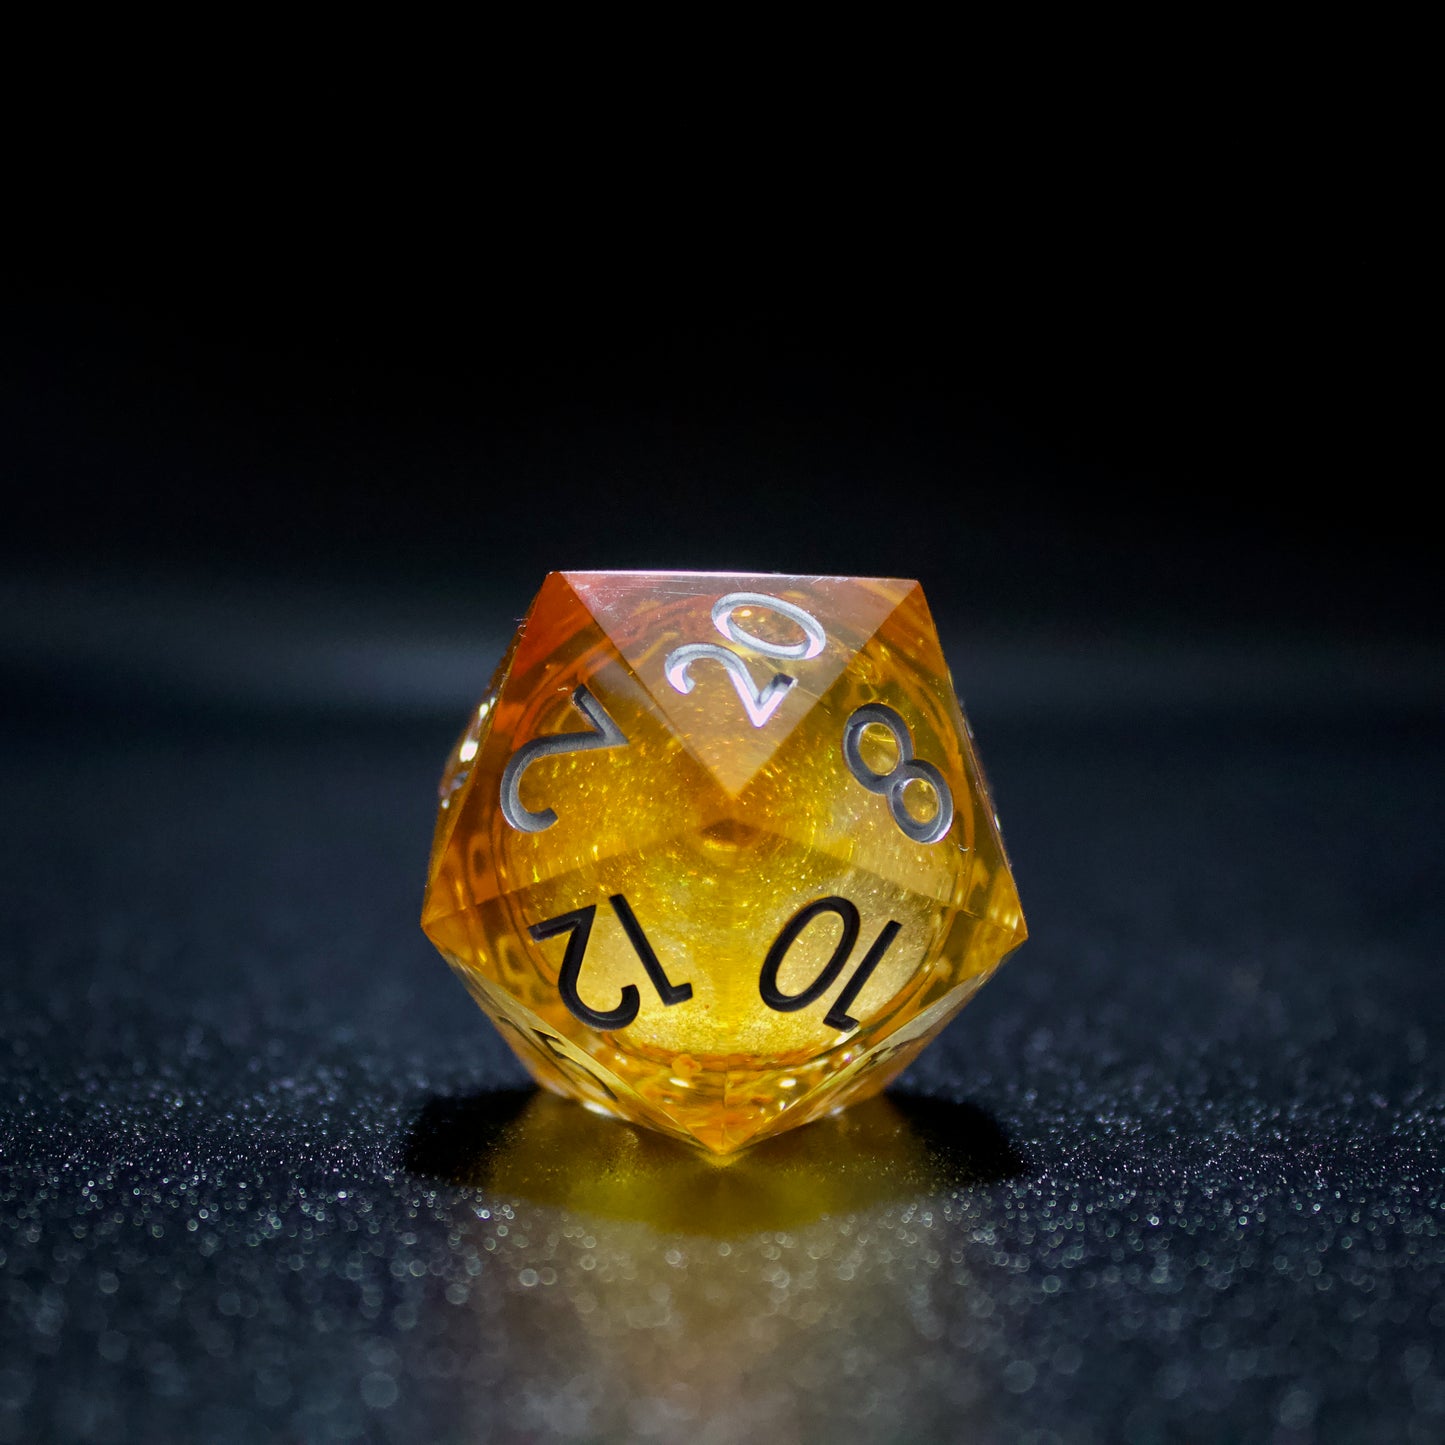 Liquid core D20 chonk dnd dice set for TTRPG, role playing games and dice goblin, critter collectors